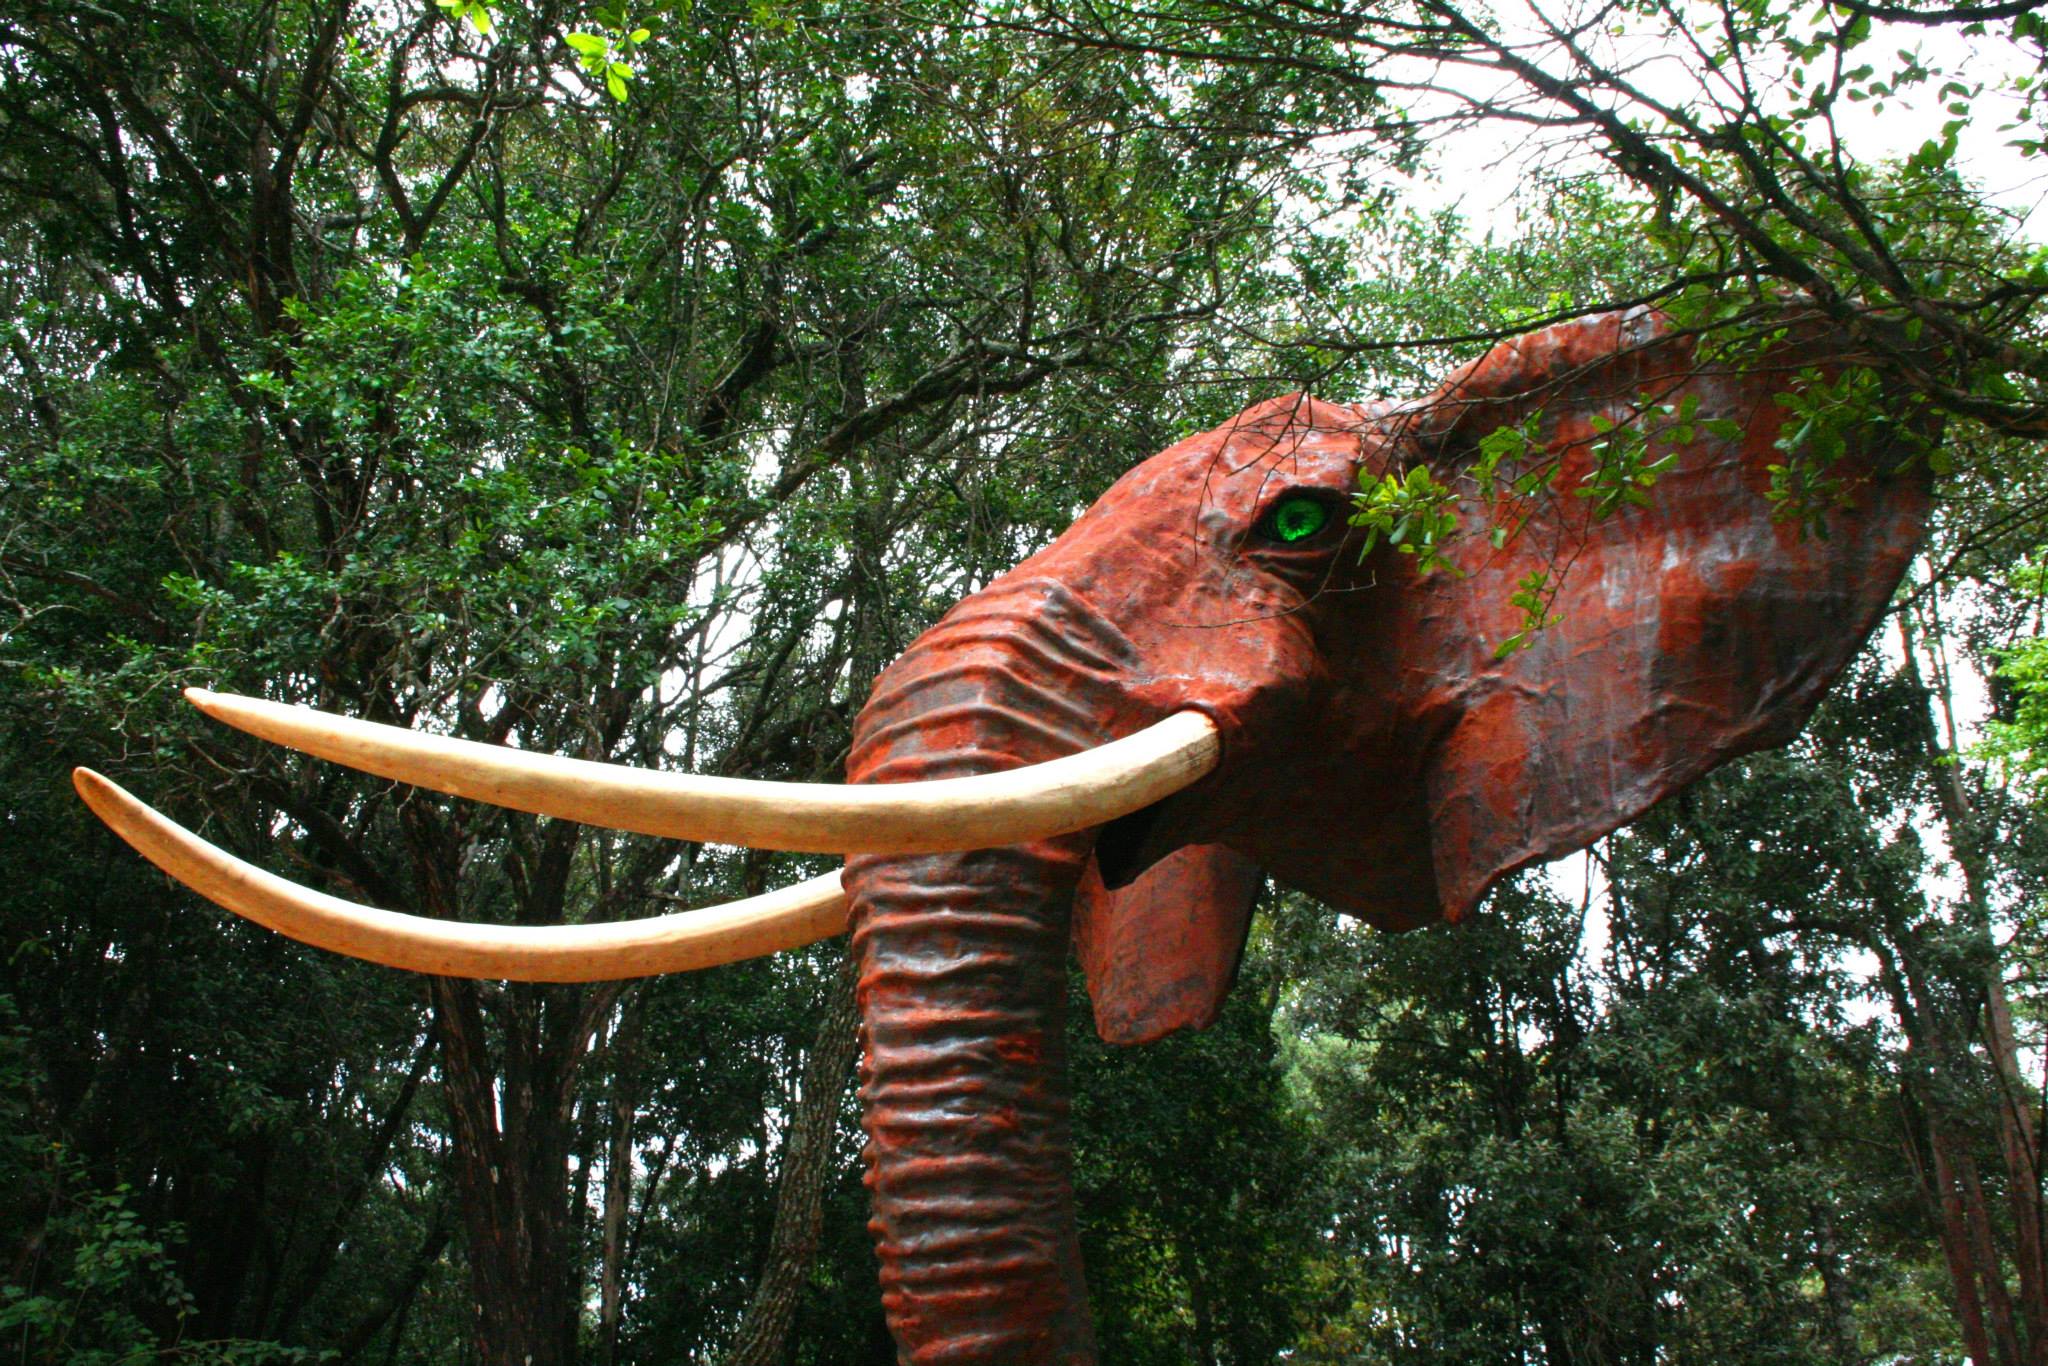 A life-size elephant sculpture with glowing eyes will greet you as you enter Matbronze Art Gallery & Foundry. ©Matbronze Wildlife Art